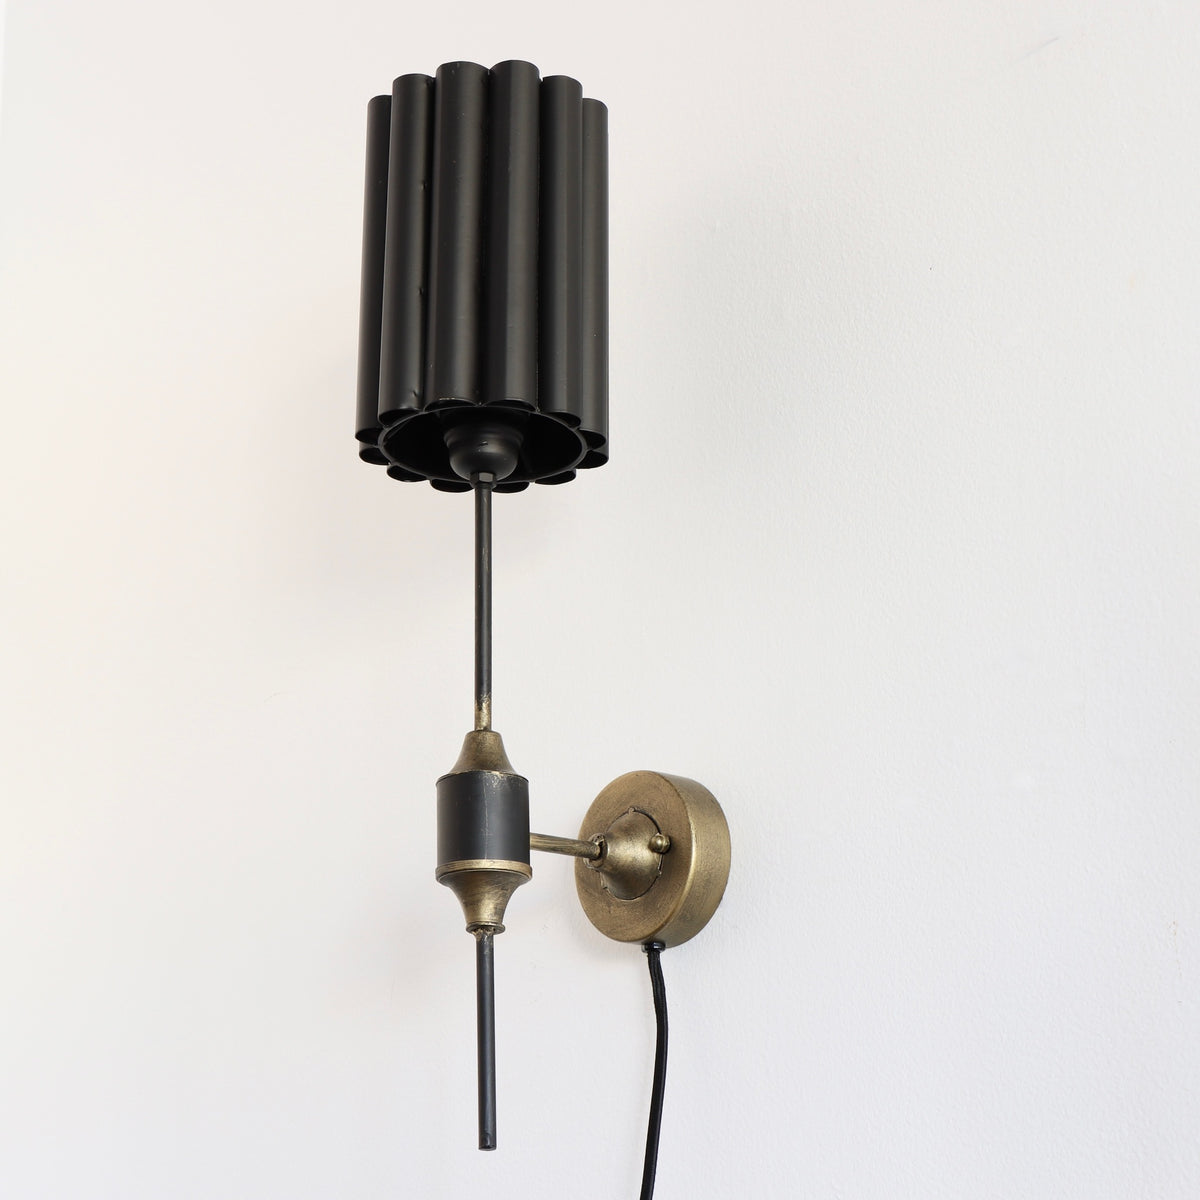 Kali Distressed Gold Wall Sconce with Black Fluted Shade - Holistic Habitat 